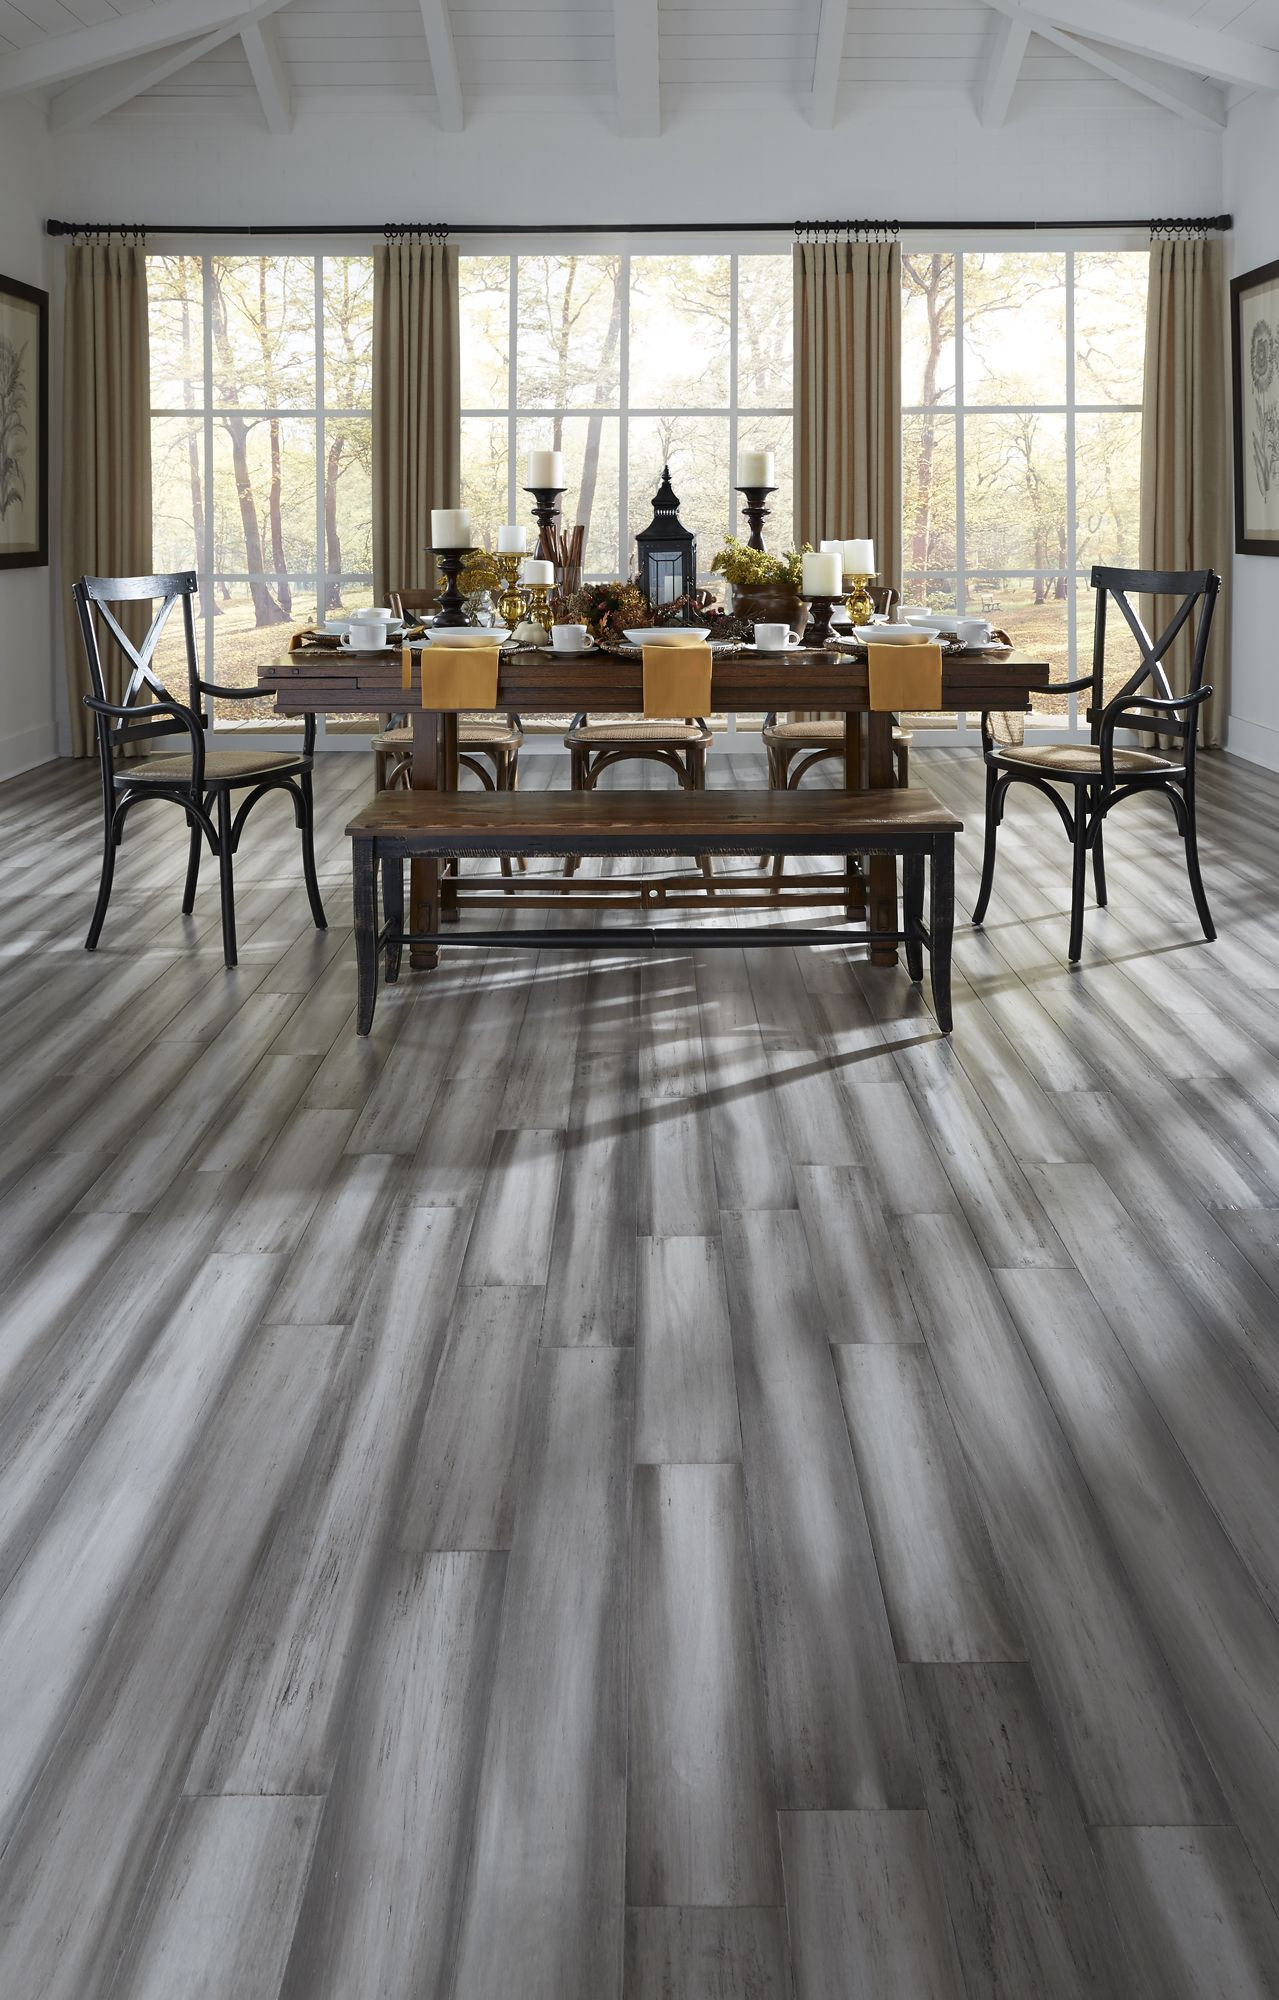 12 Stylish Hand Scraped Hardwood Flooring Definition 2024 free download hand scraped hardwood flooring definition of modern design and rustic texture pair perfectly with the stately within modern design and rustic texture pair perfectly with the stately blend of